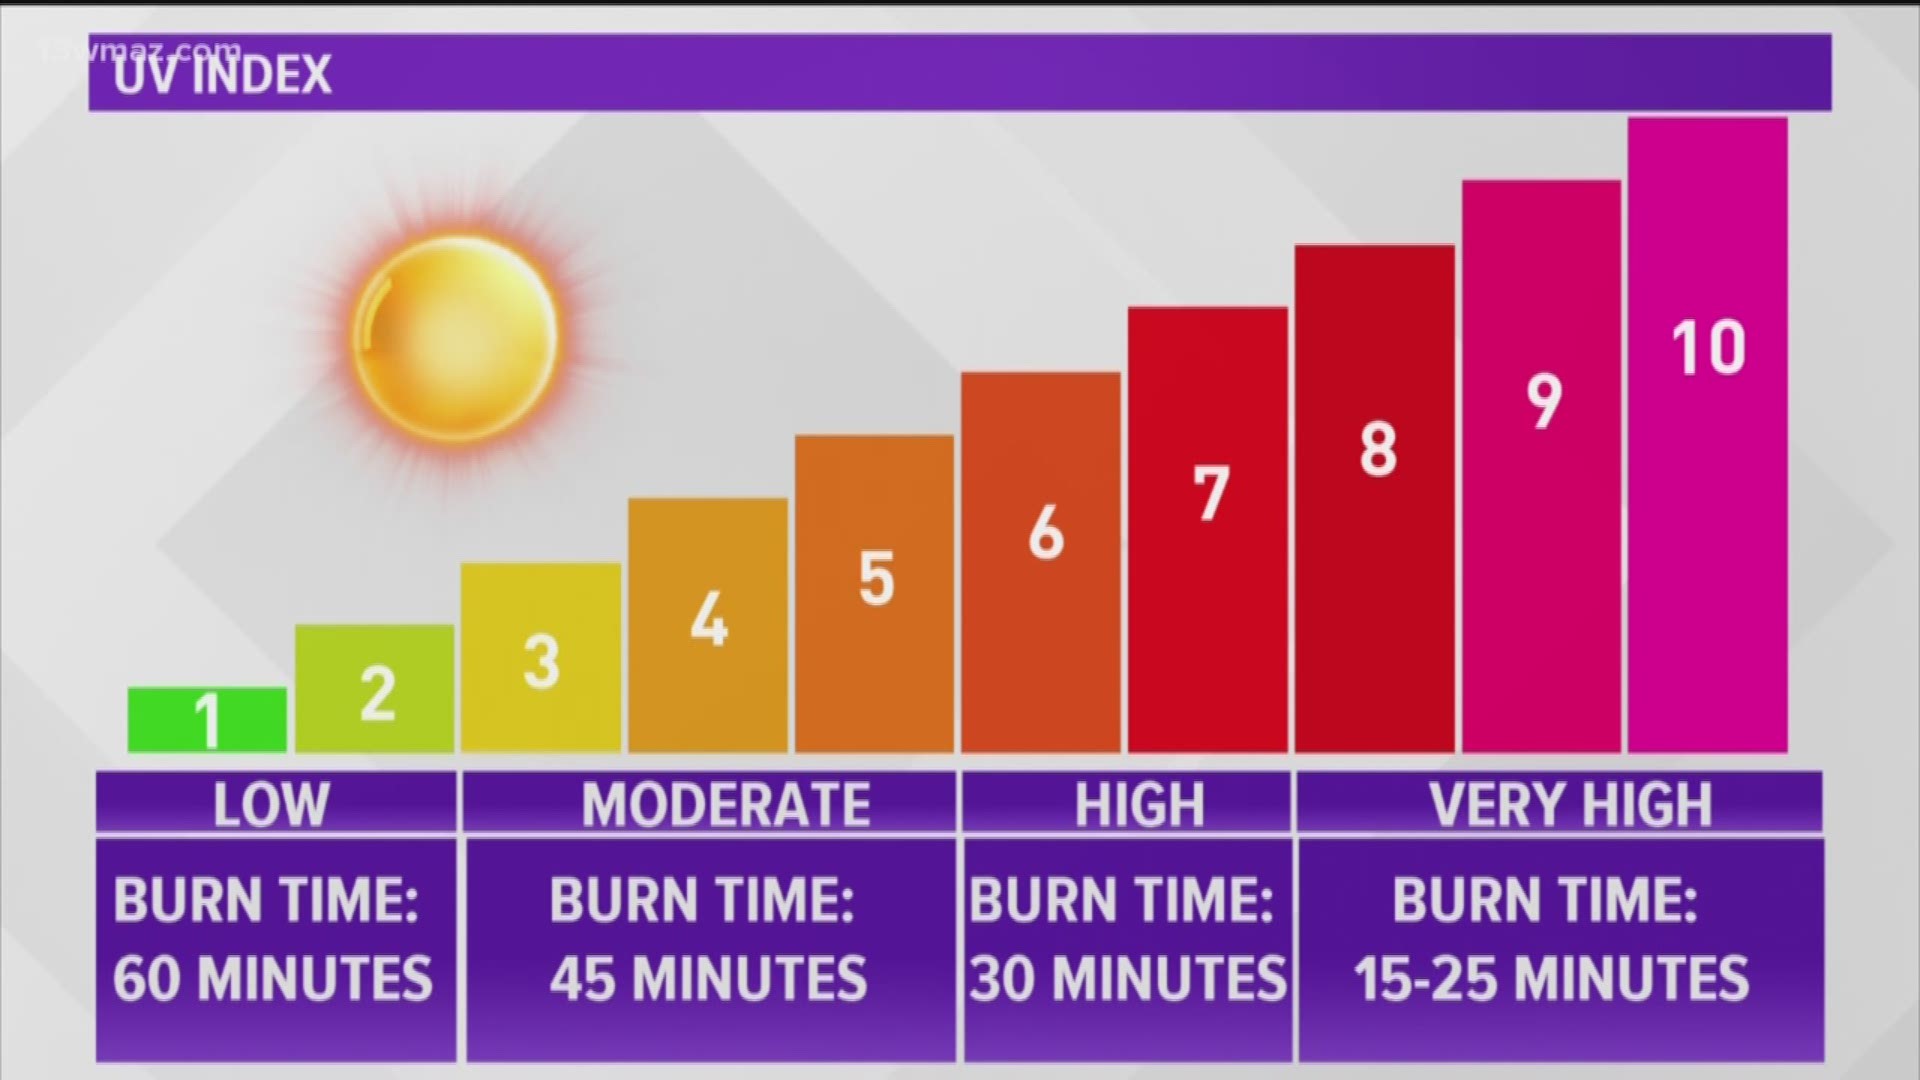 When the UV index is at it's highest, all it takes is 15 minutes of sun exposure to experience a sunburn.